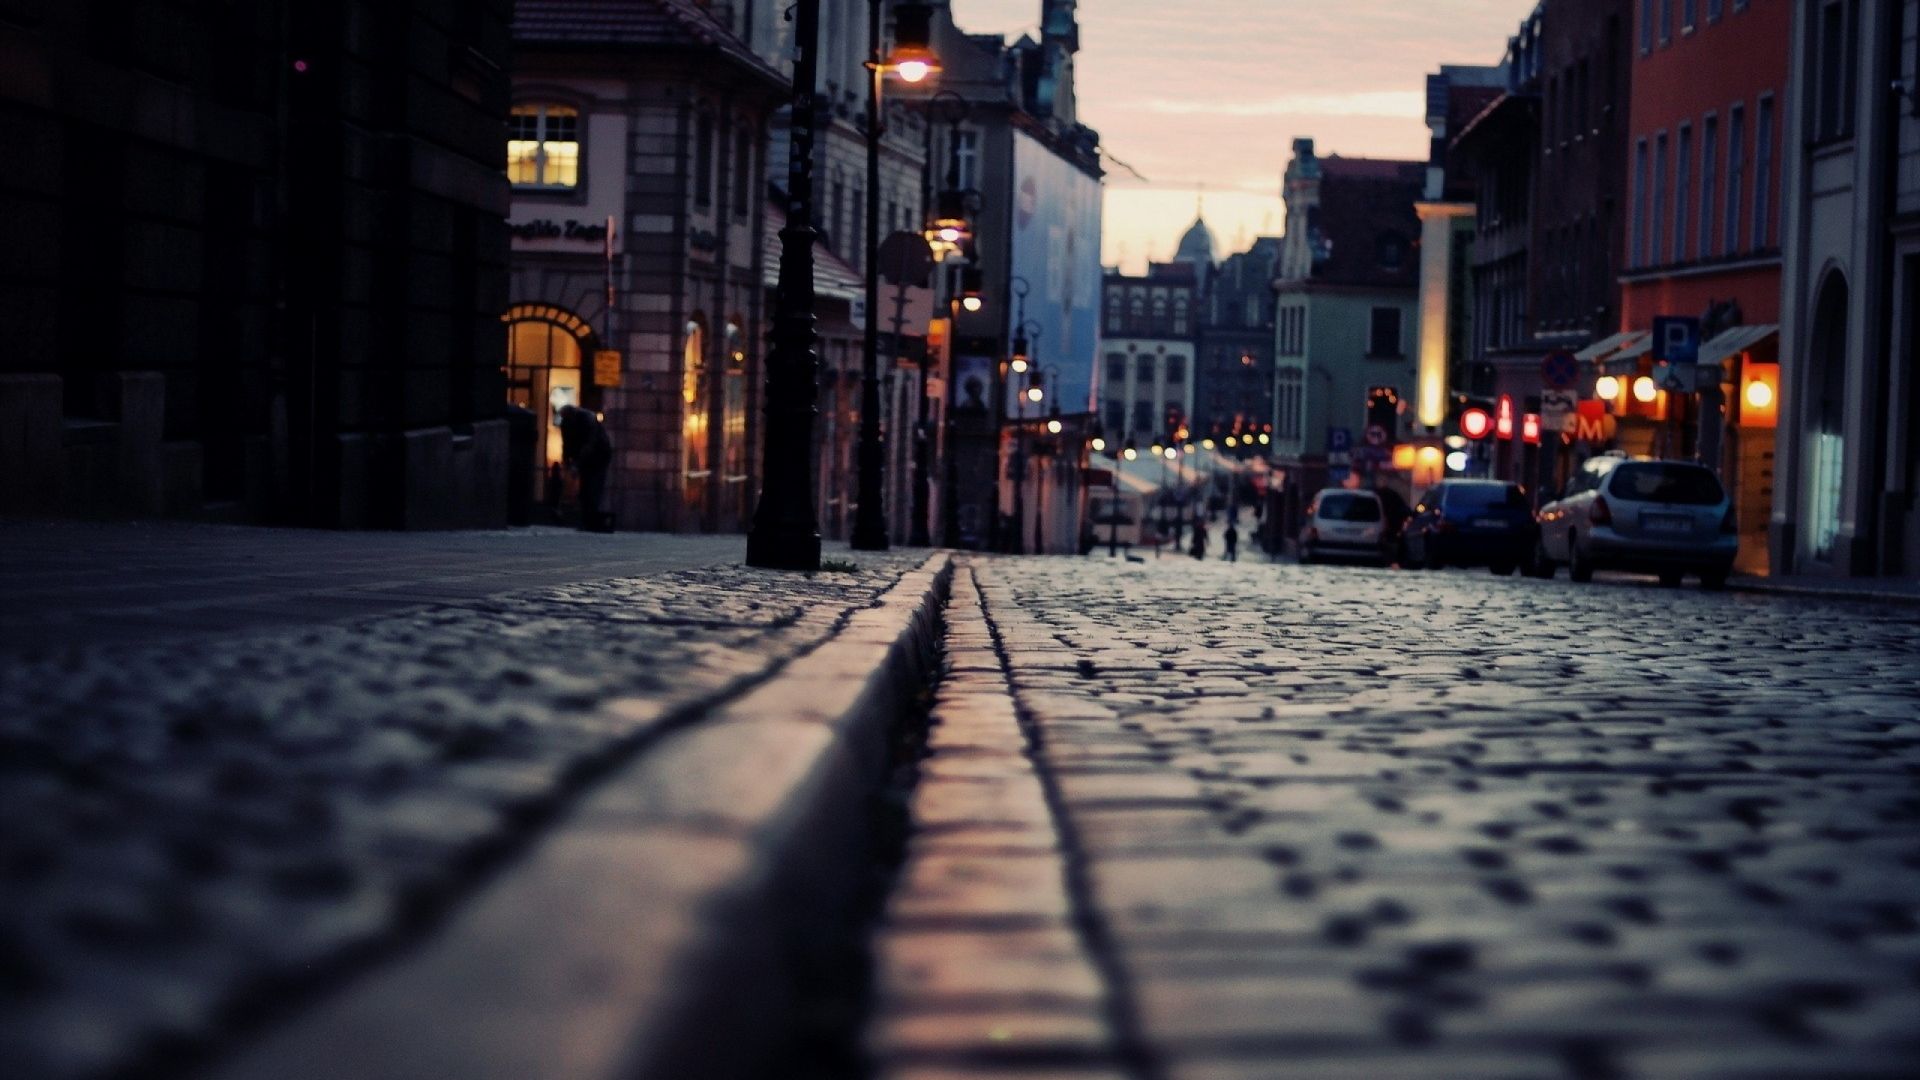 Desktop Wallpaper London Paved Street In Sunset, Hd Image, Picture,  Background, Pngtq5